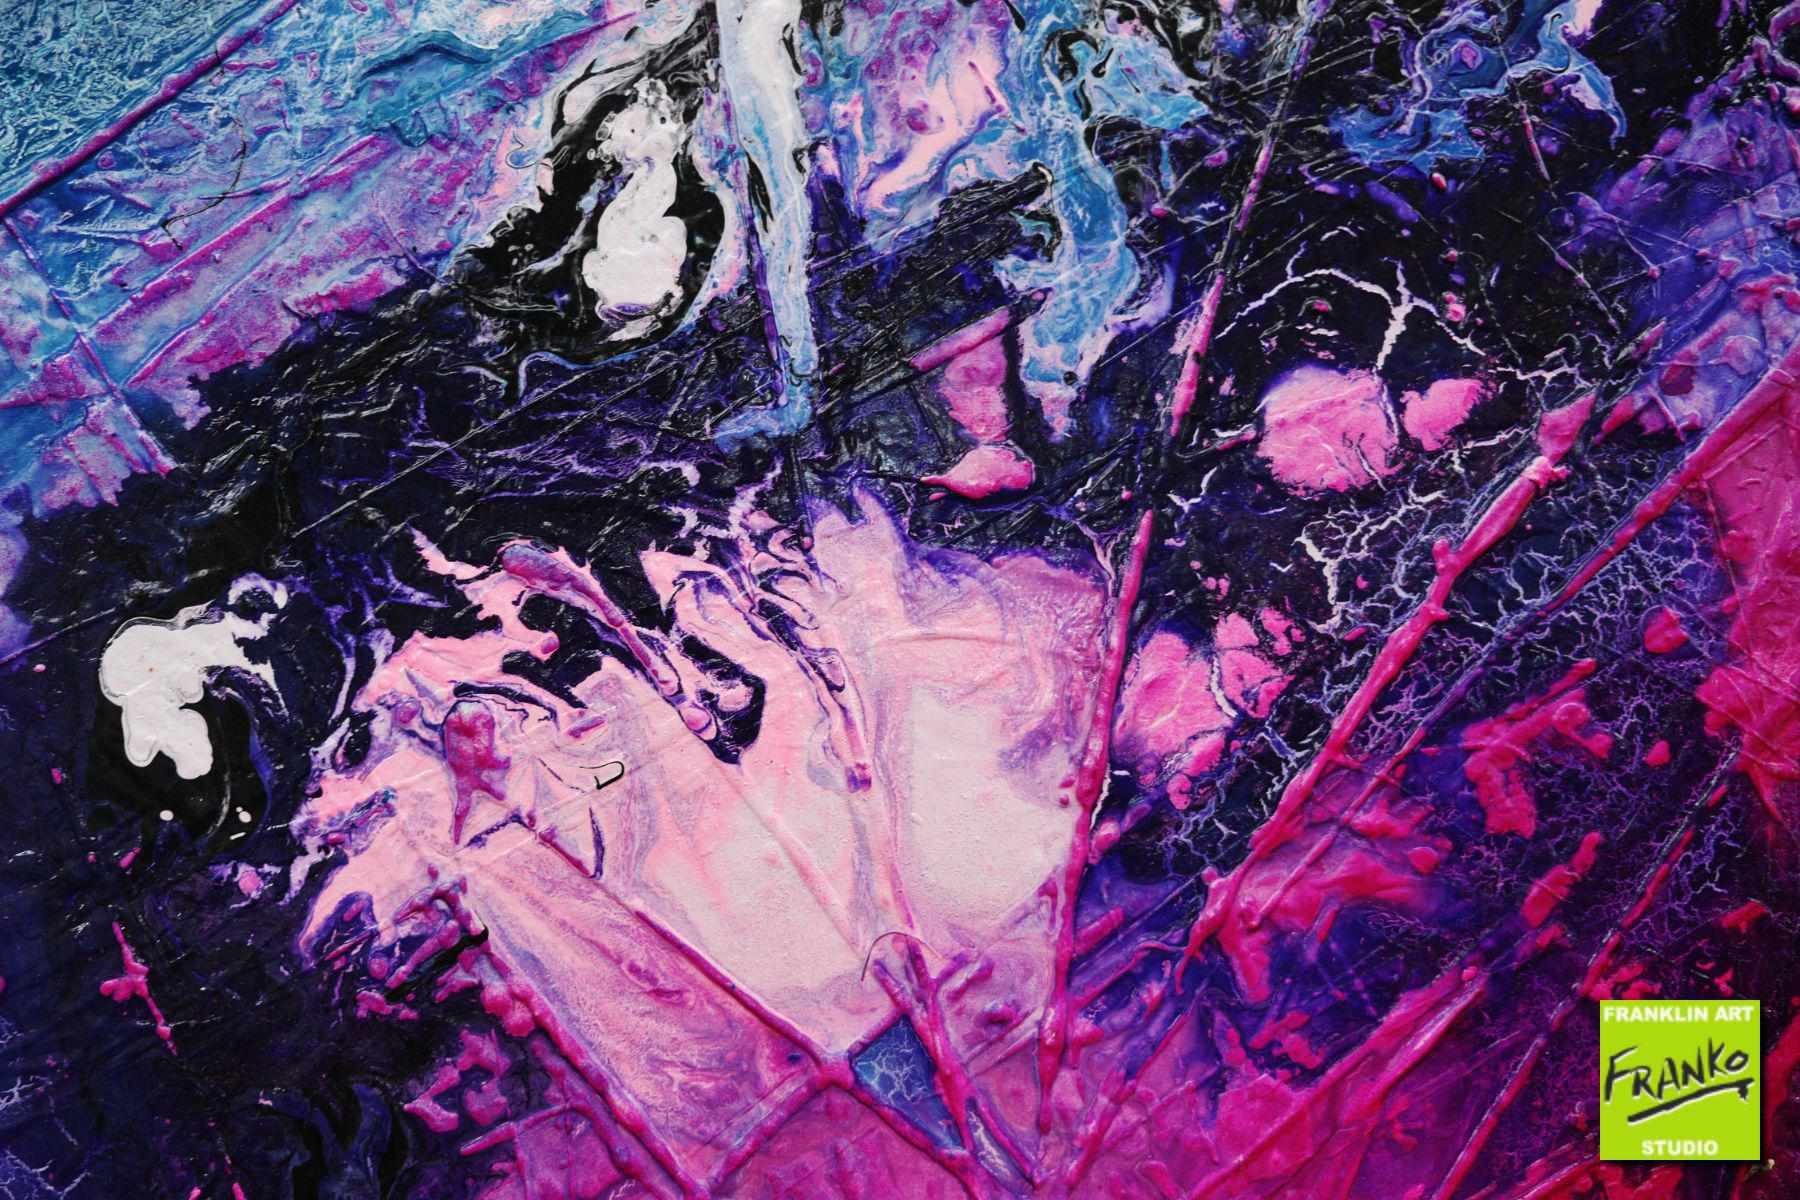 Atoms & Neutrons 140cm x 100cm Pink Blue Textured Abstract Painting (SOLD)